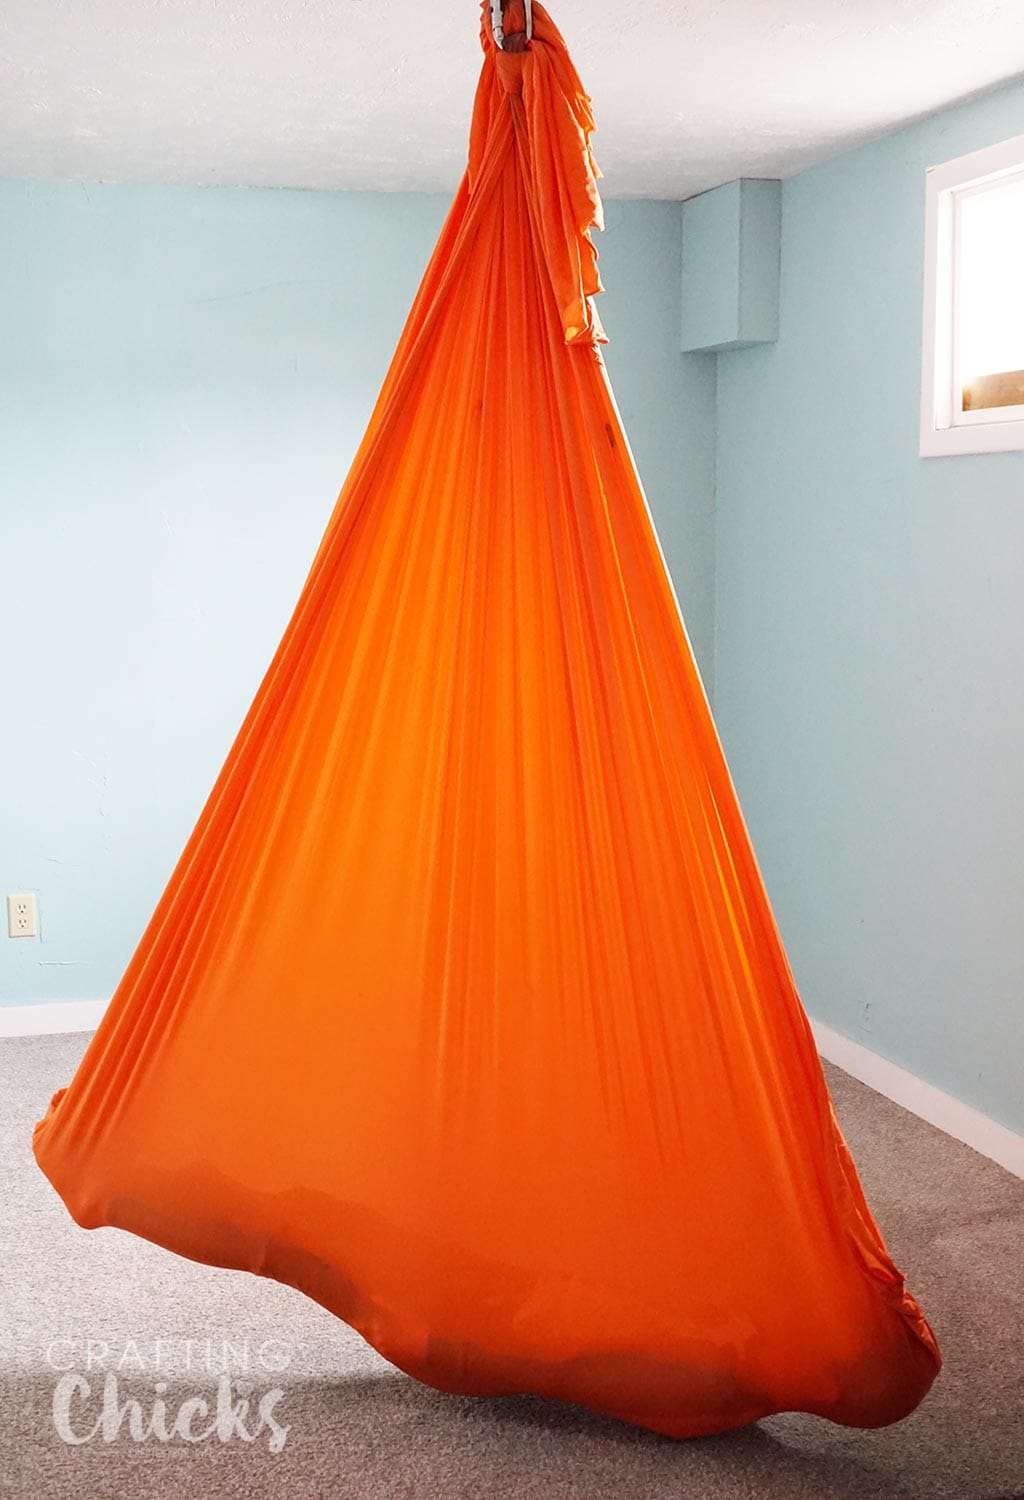 Yoga Hammock for SPD therapy - What you need to set up a therapy gym at home for sensory processing disorder.